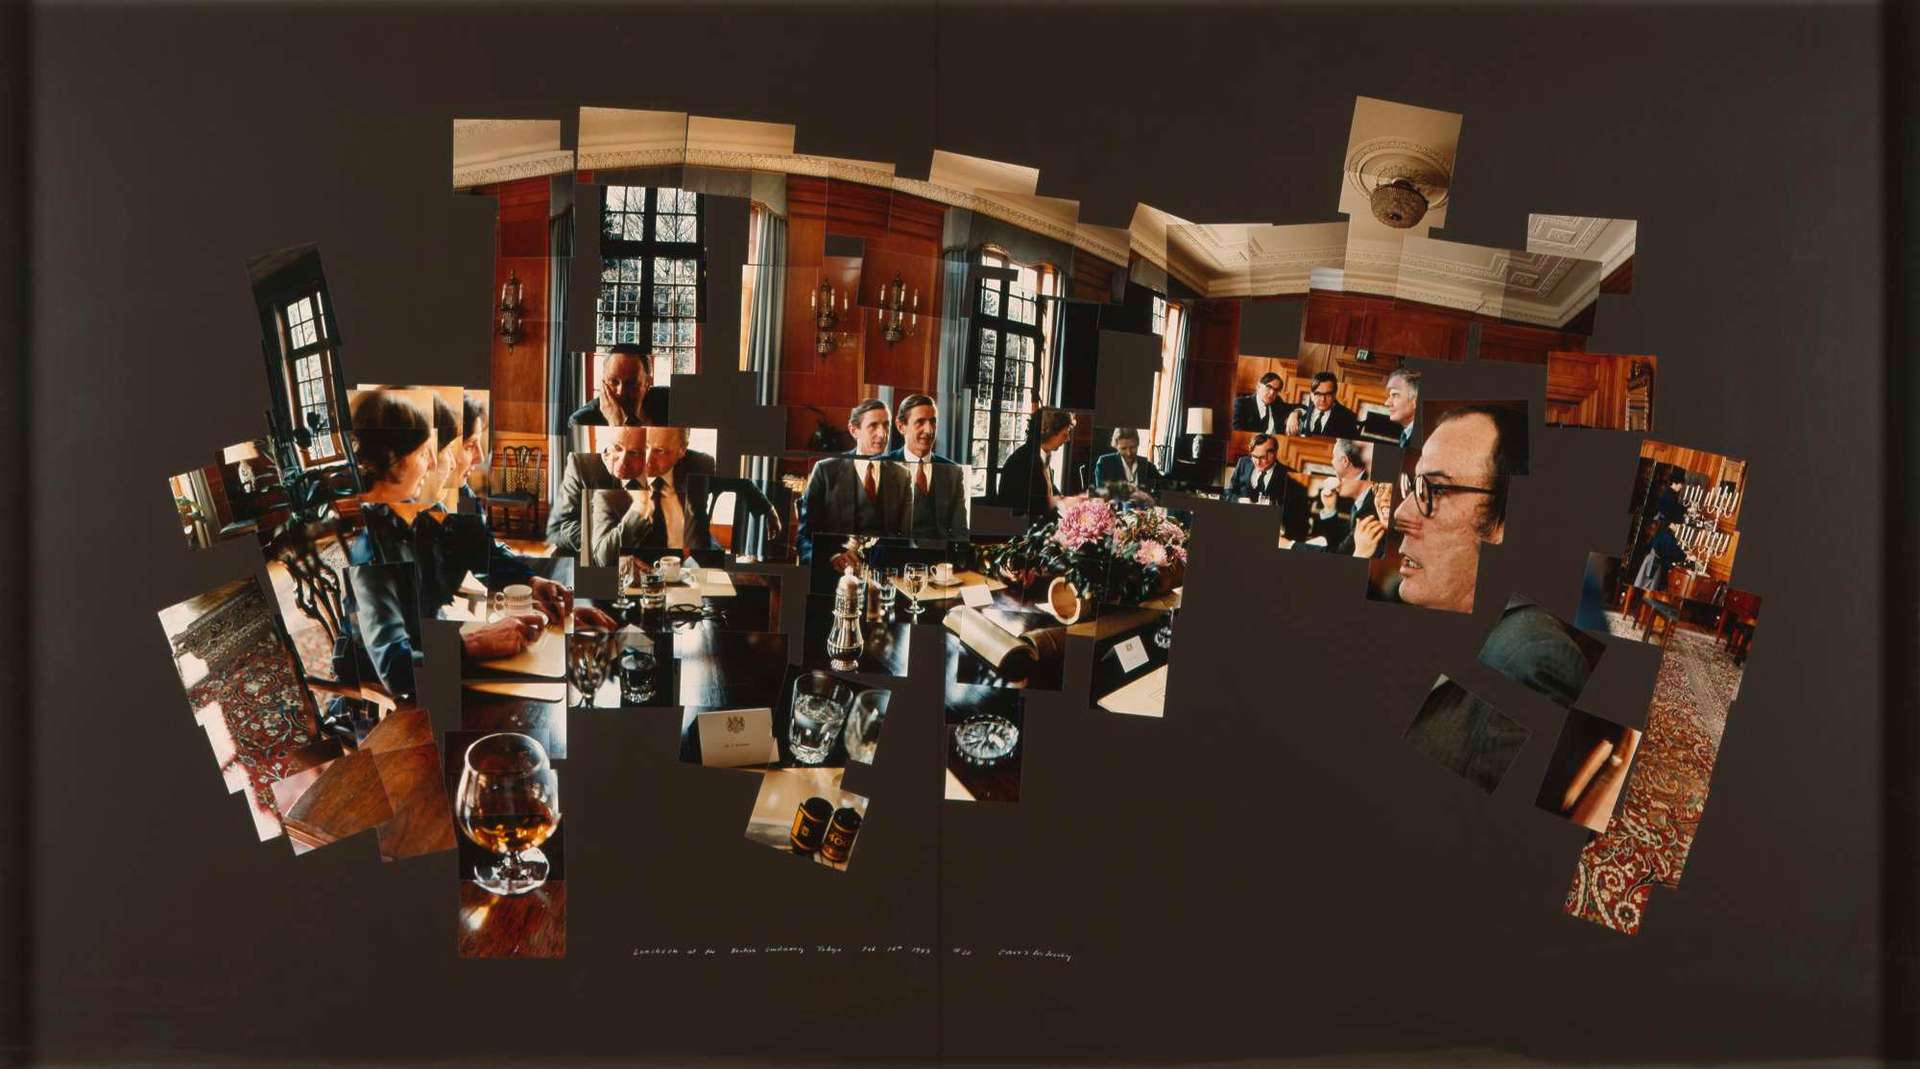 David Hockney's Luncheon at the British Embassy, Tokyo, 16 February 1983. A mixed media assemblage of collage style photograph